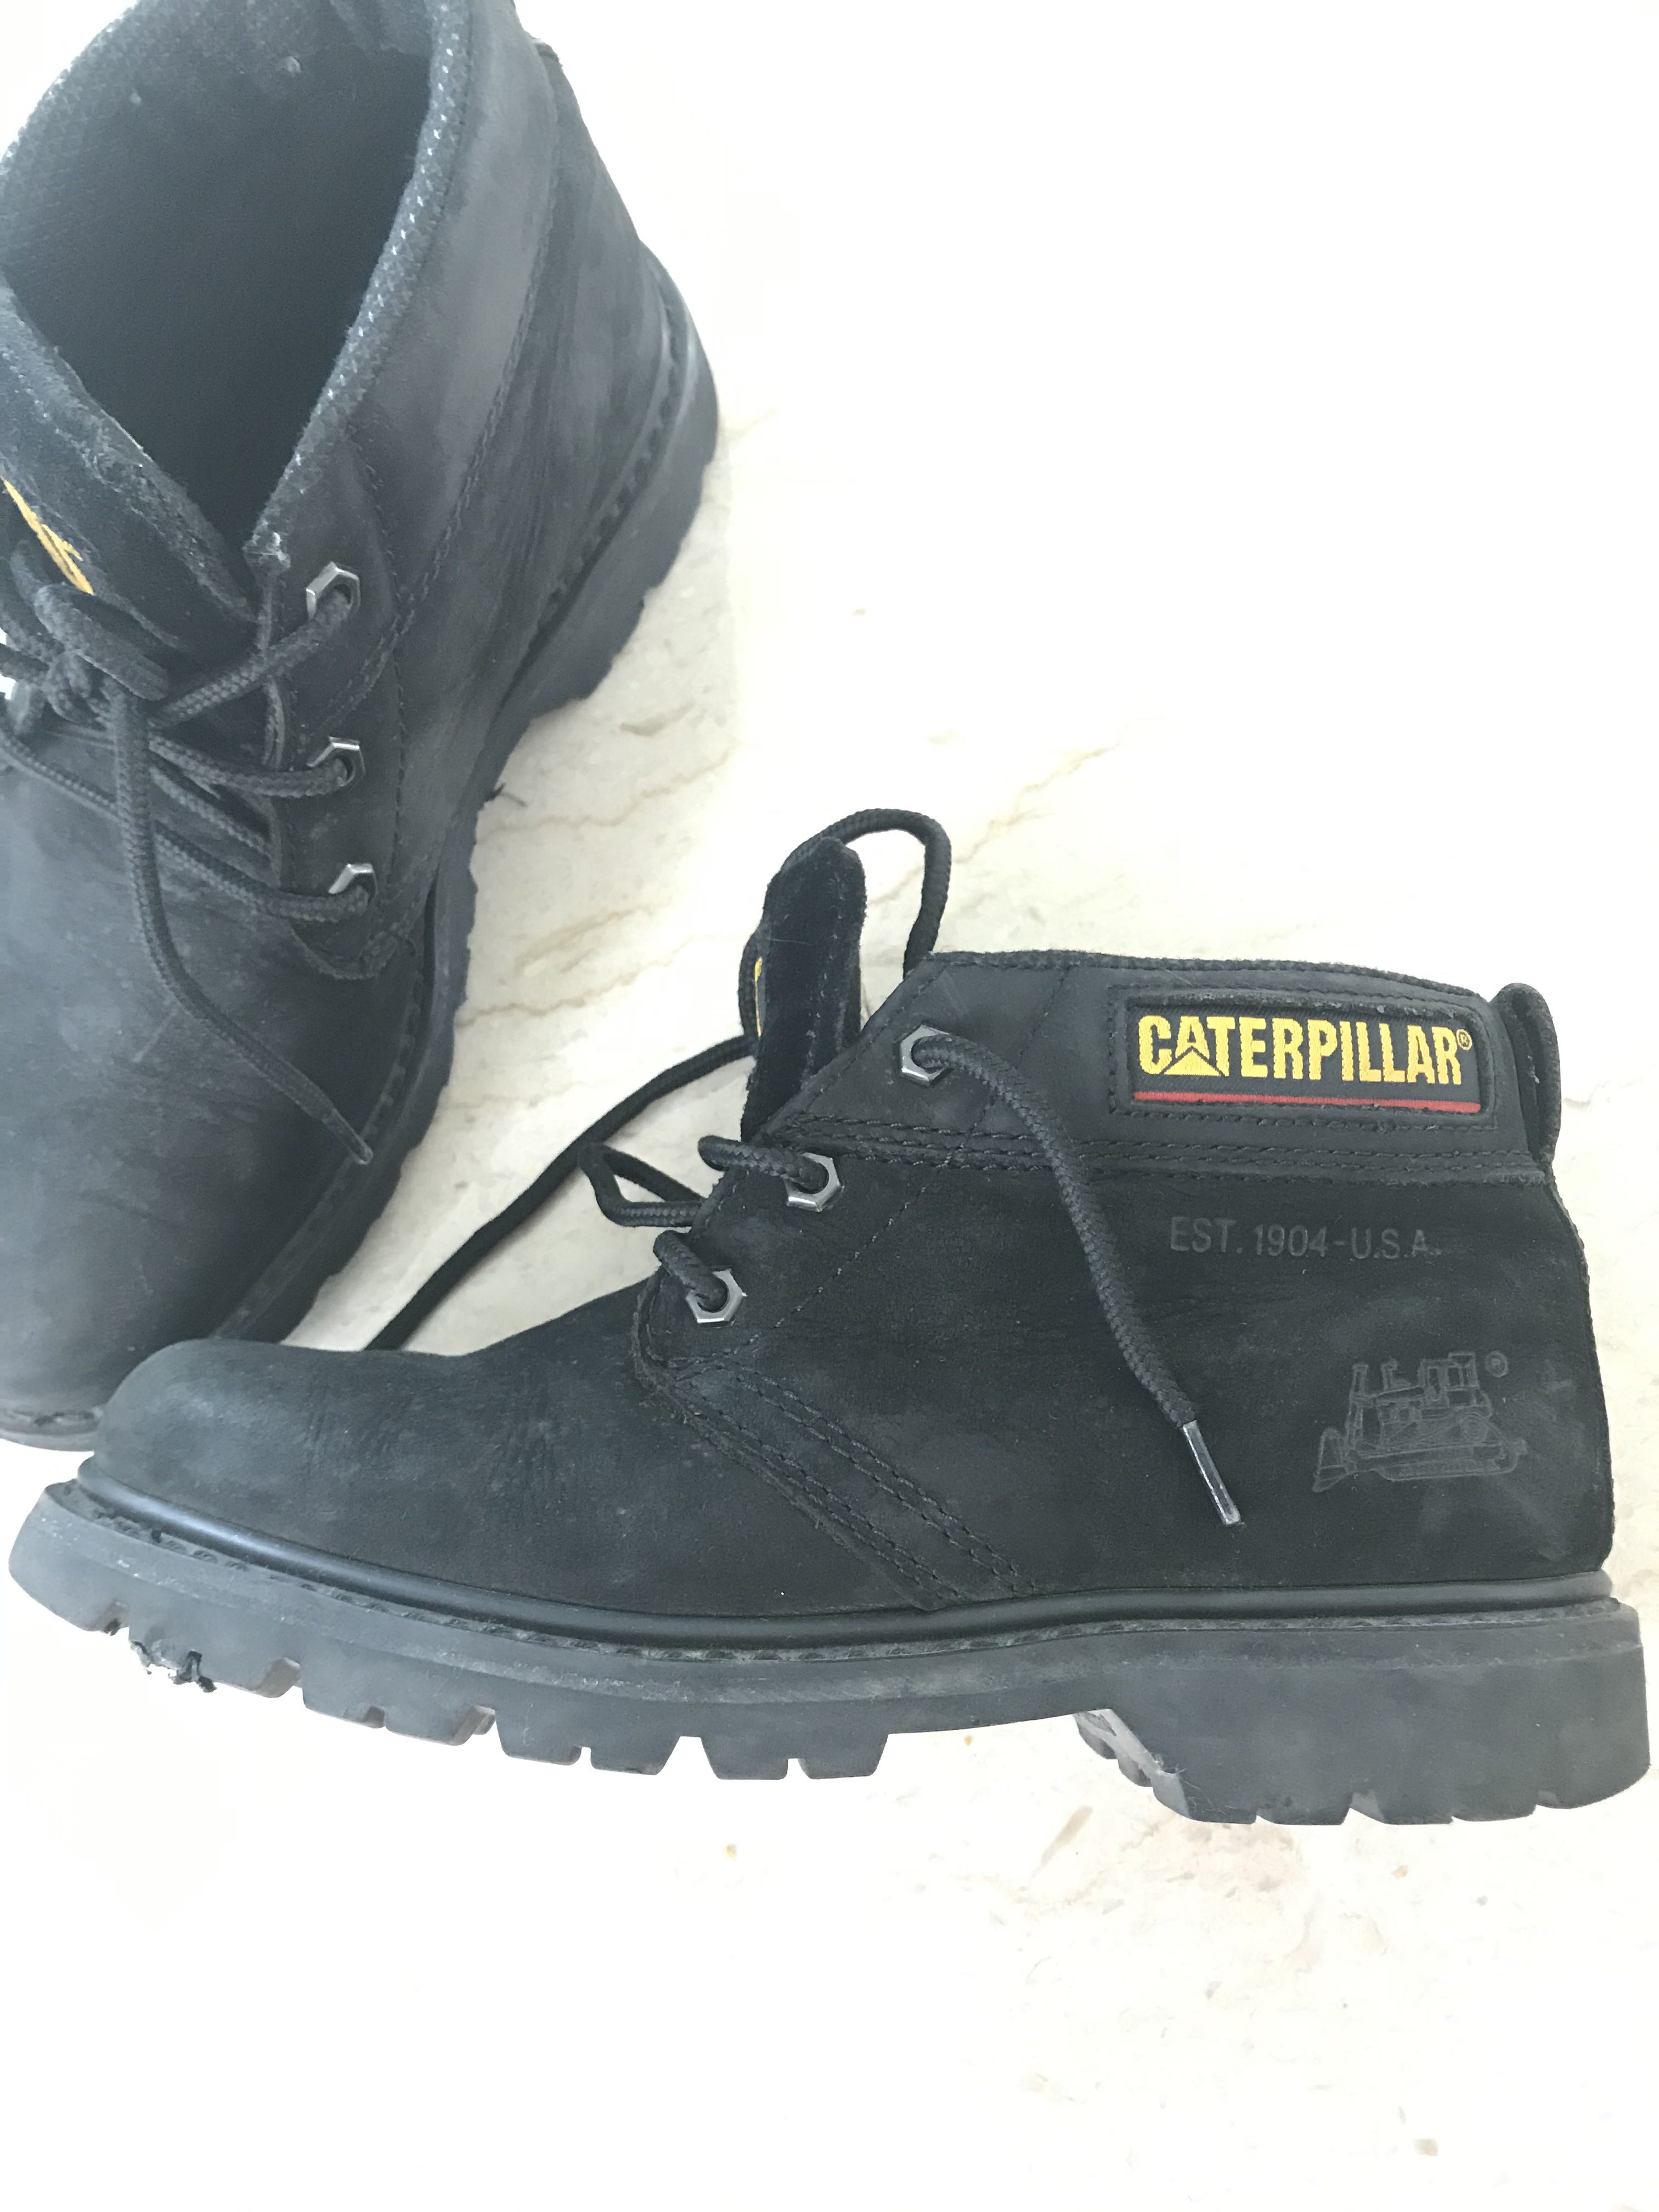 caterpillar leather shoes